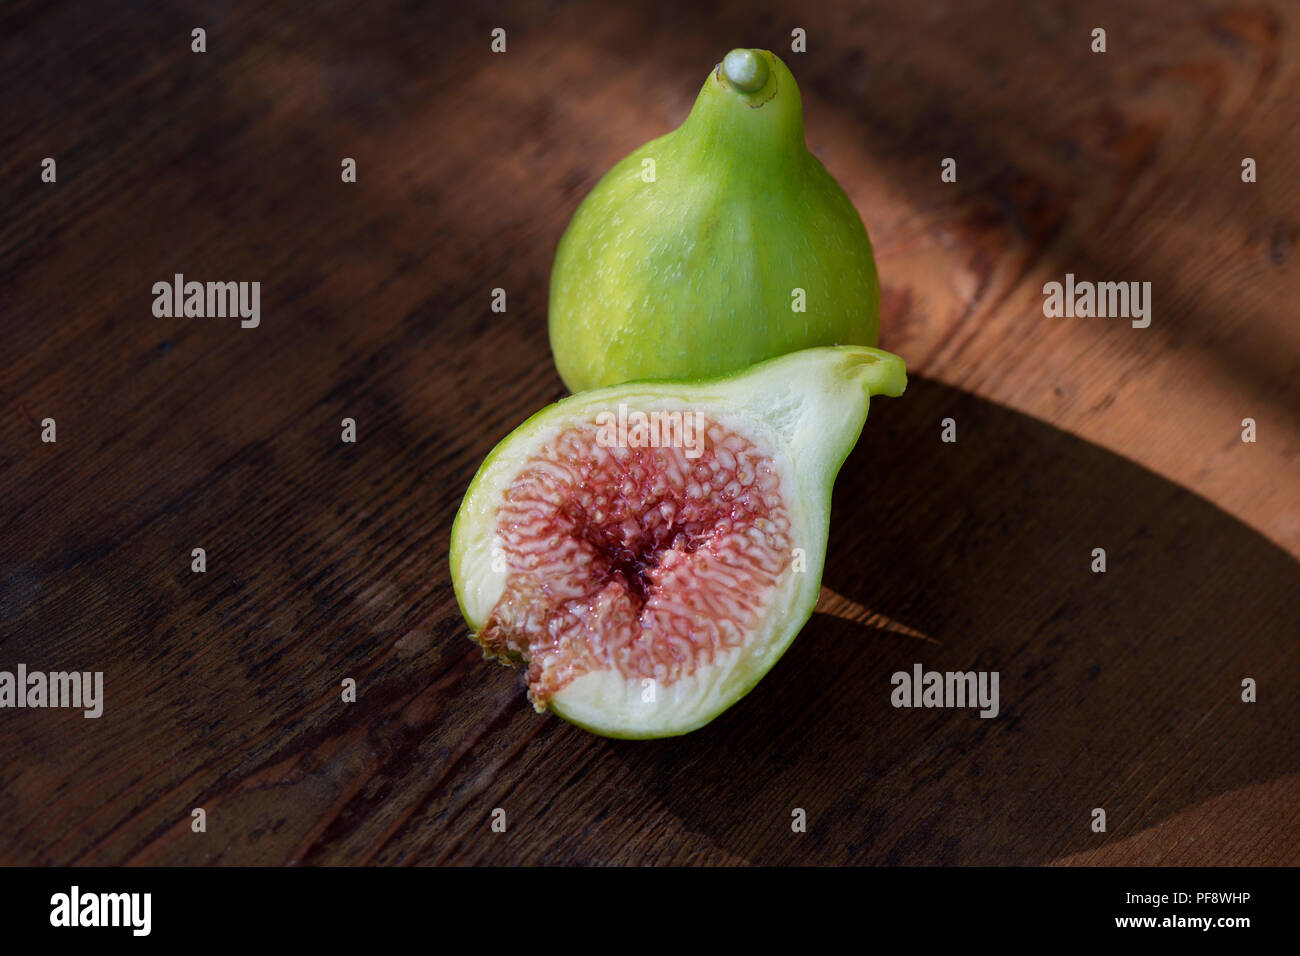 Organic, freshly picked ripe Kadota figs on a table, one fruit sliced in half showing purple pulp, artistic food still life on wood background Stock Photo